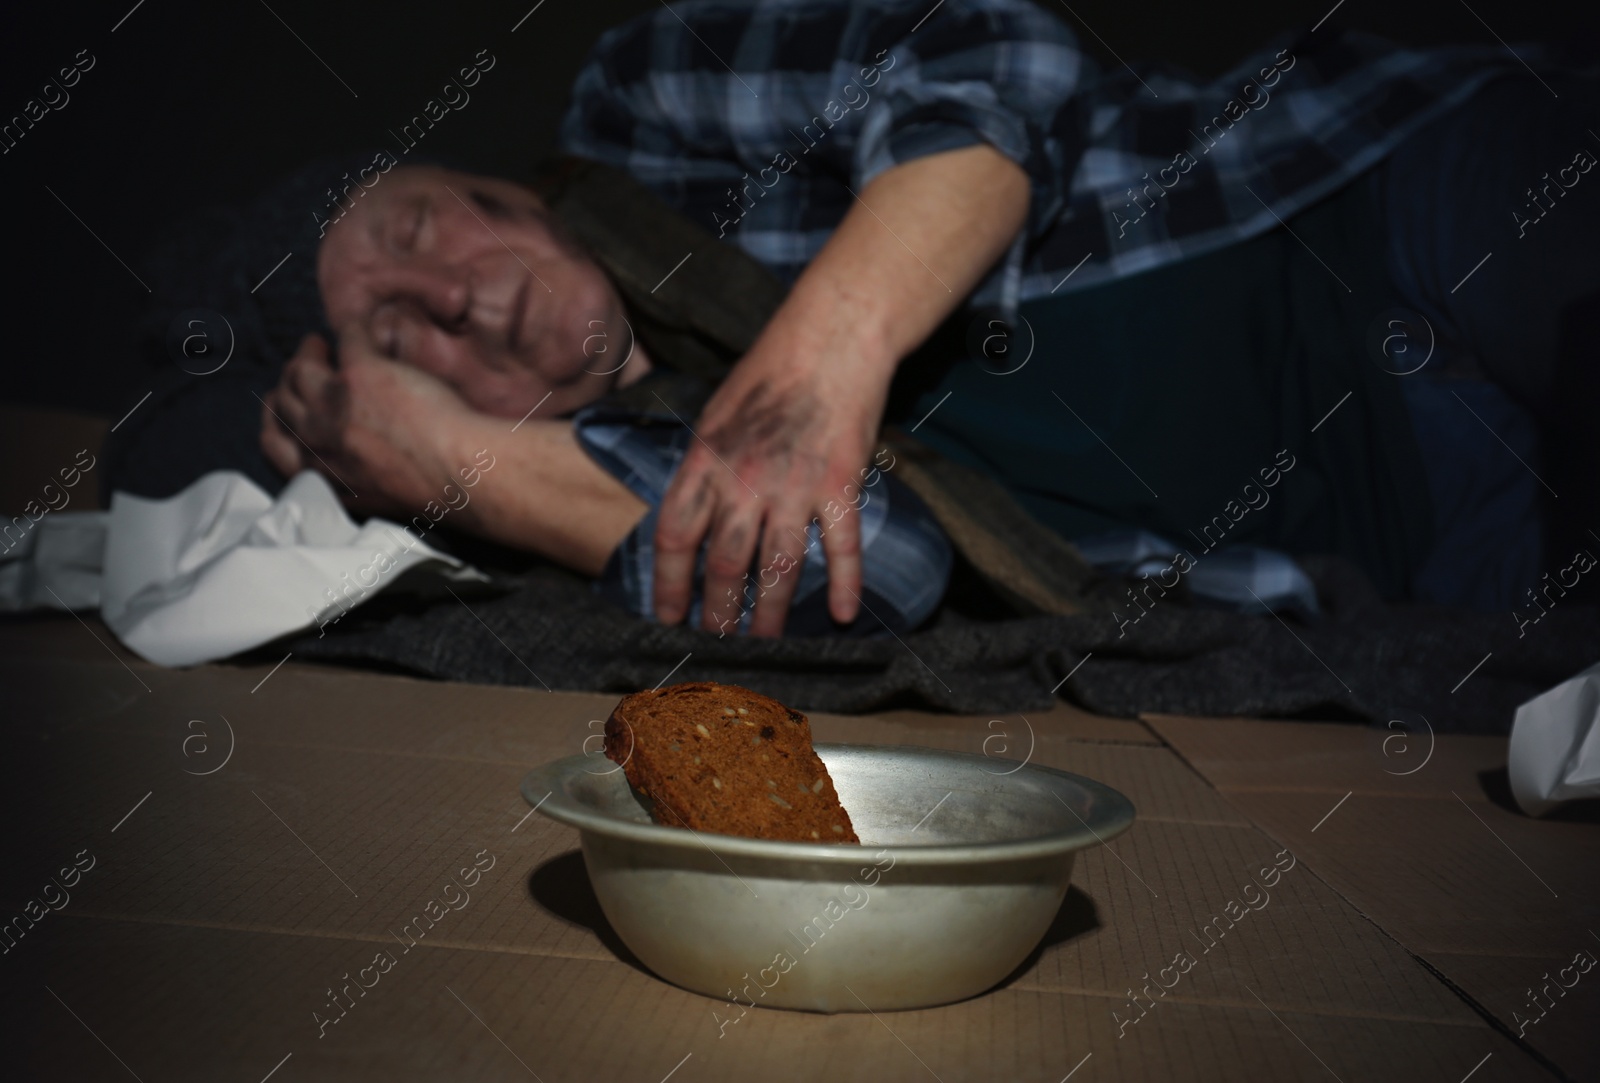 Photo of Bowl with bread and poor senior man on floor